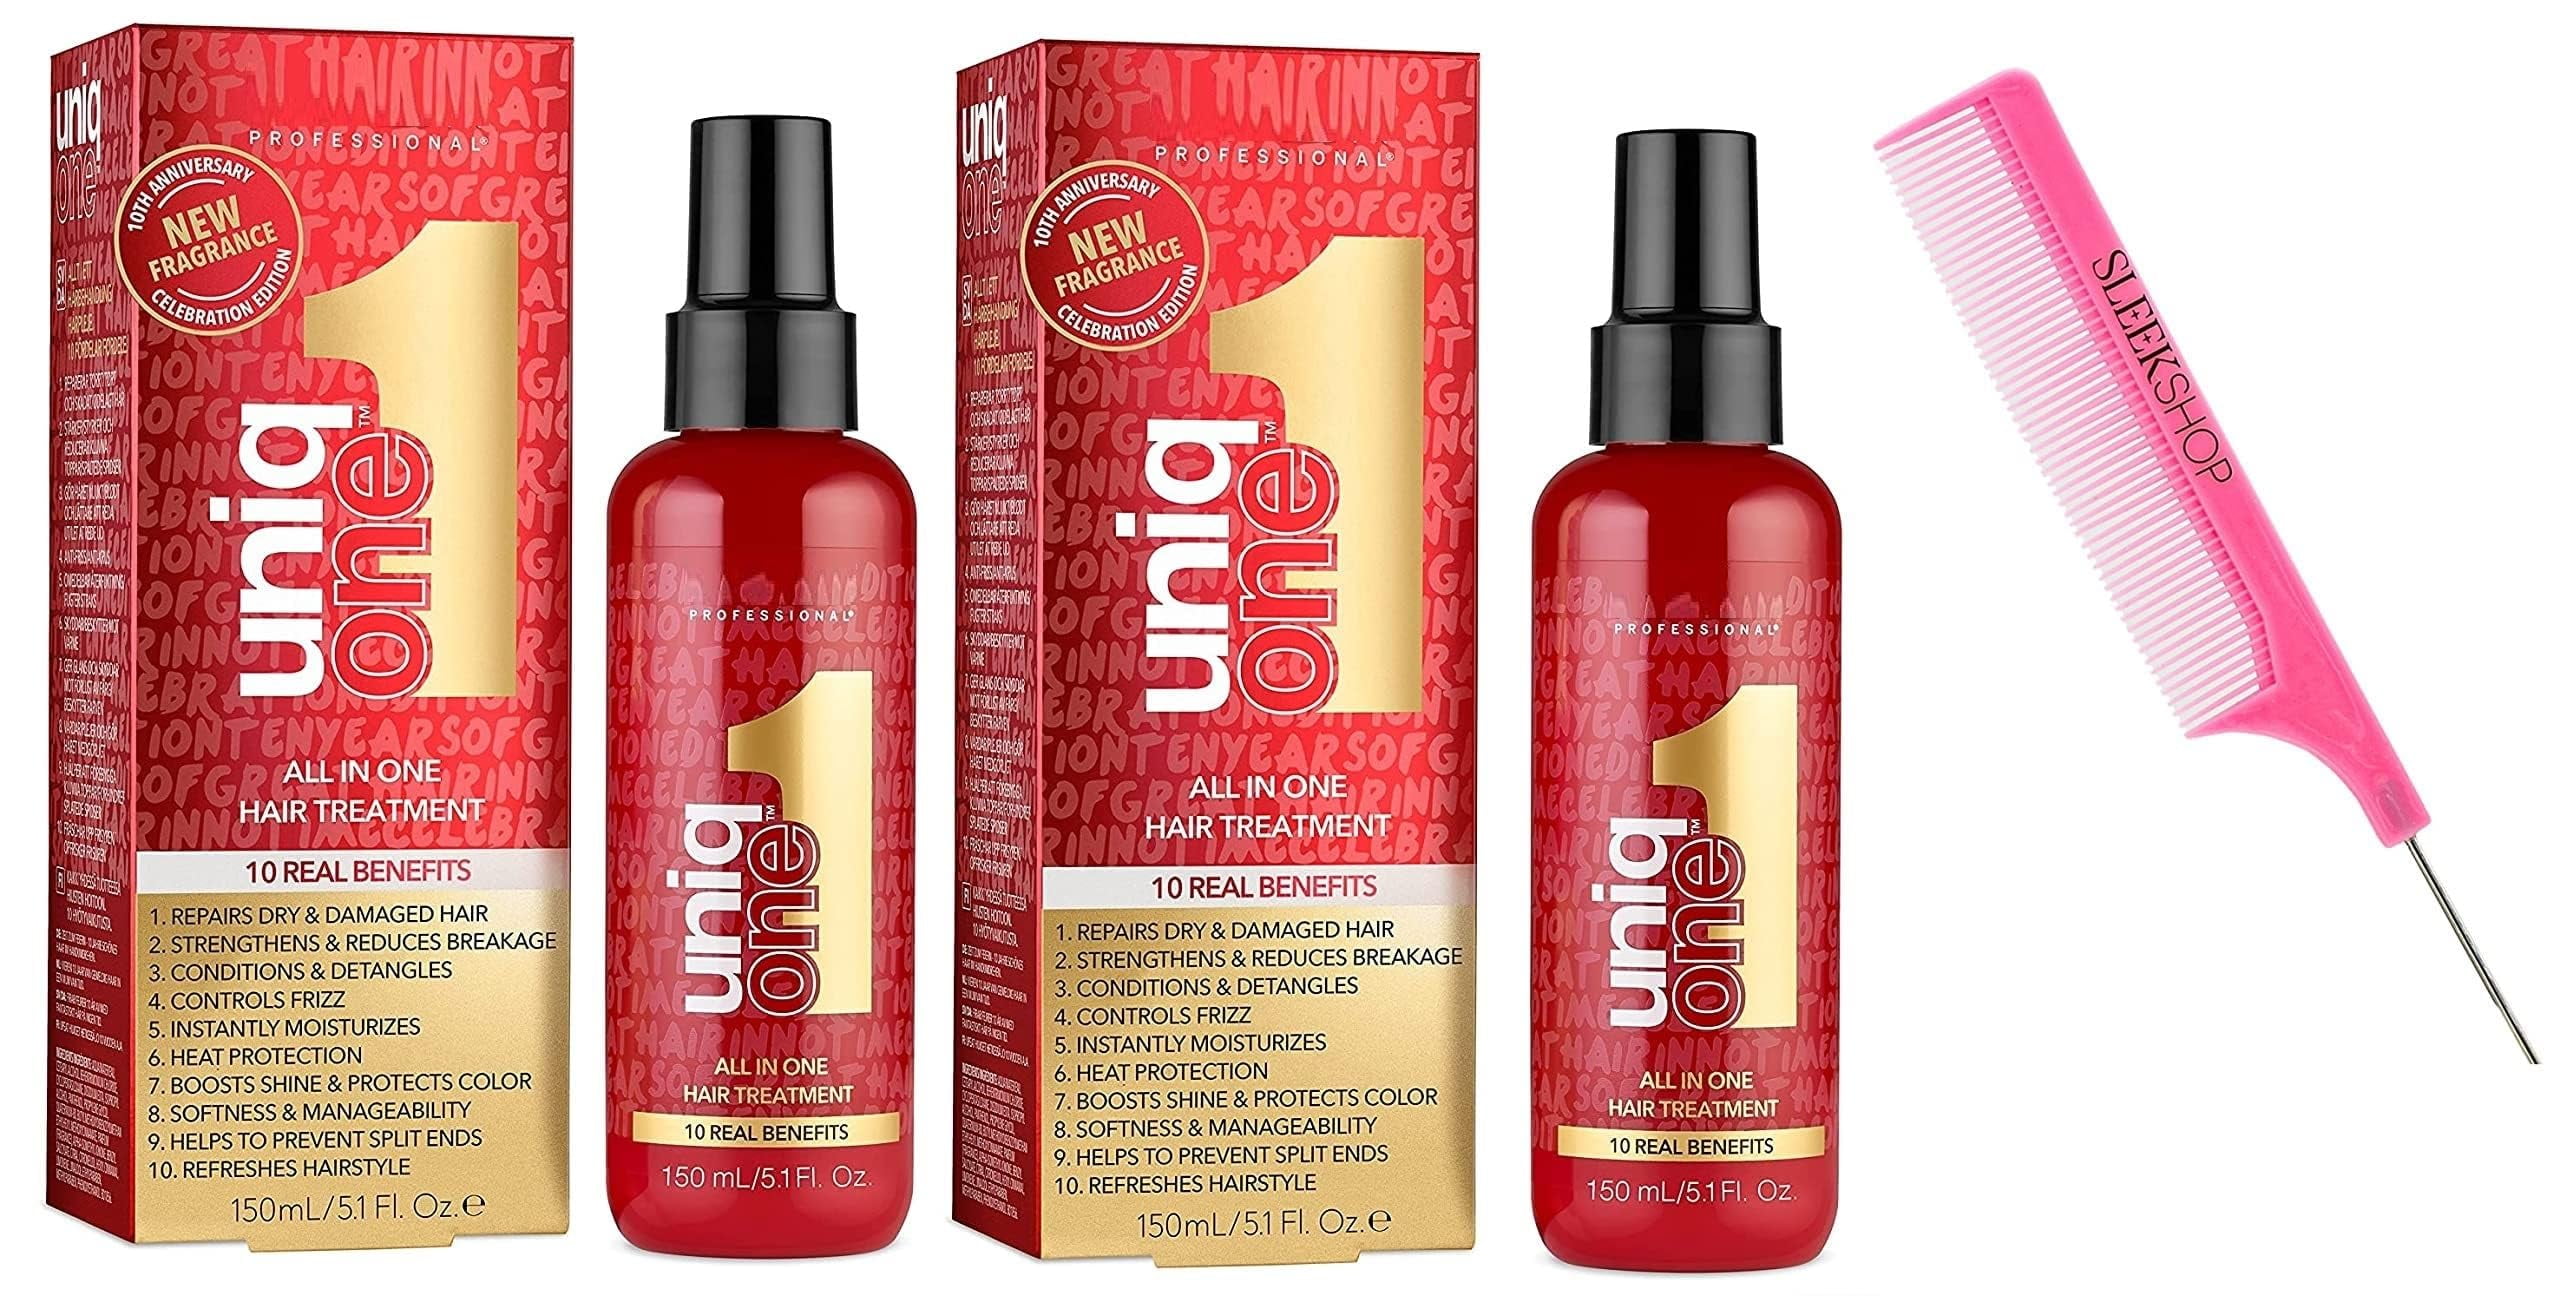 Revlon Uniq ONE 1 , oz Pink for UNIQONE One Shine SLEEKSHOP Unique Silkiness Comb) (PACK VERSION (Original Treatment, 5.1 2)) 2023-2024, - (All Serum NEWEST Hair Hair (w/ in One) OF